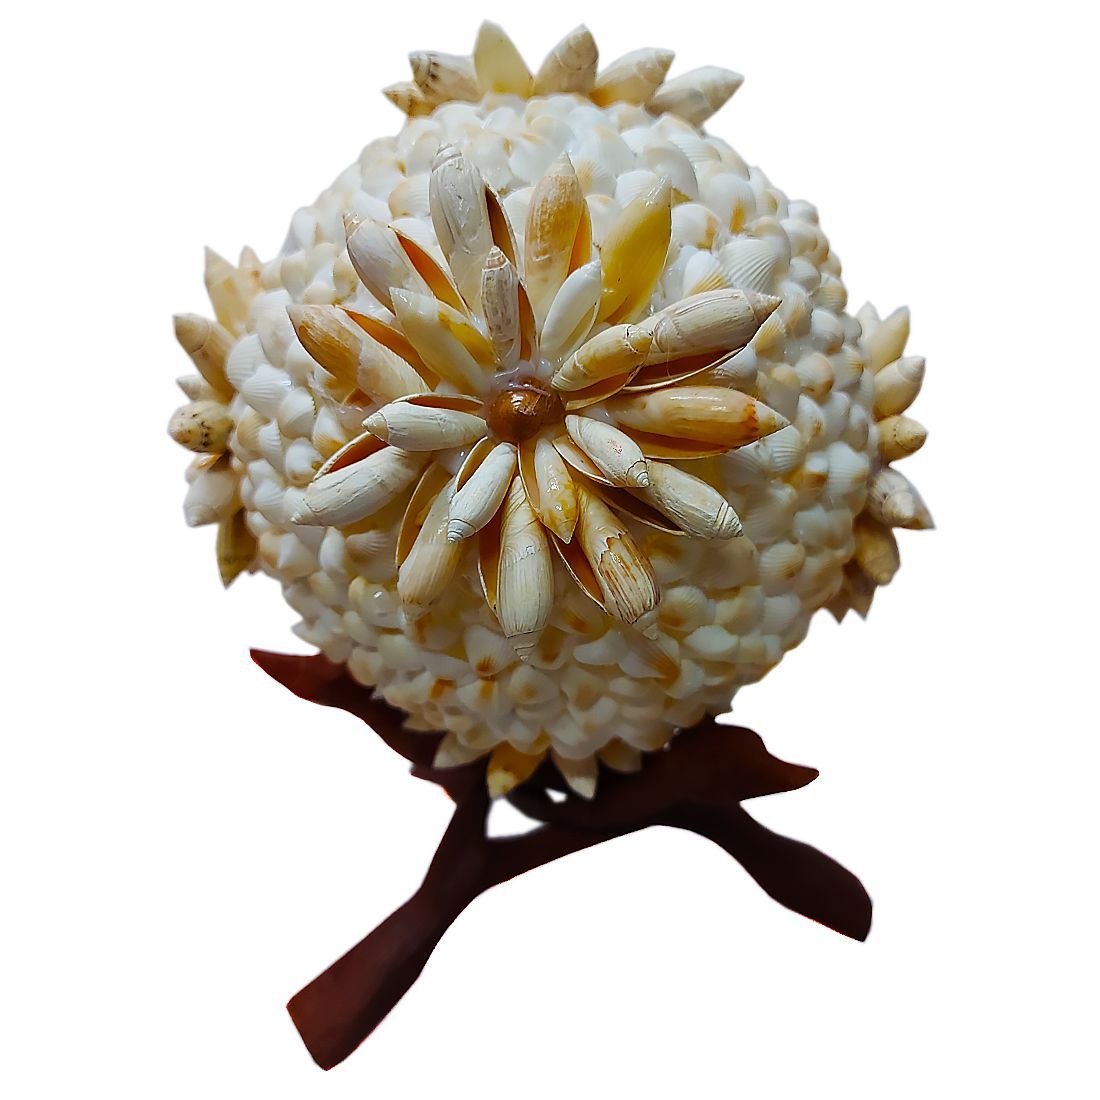 Hubshi Sea Shell Ceriths Shell Flower Ball With 3 Legs Wooden Cobra Stand Handmade